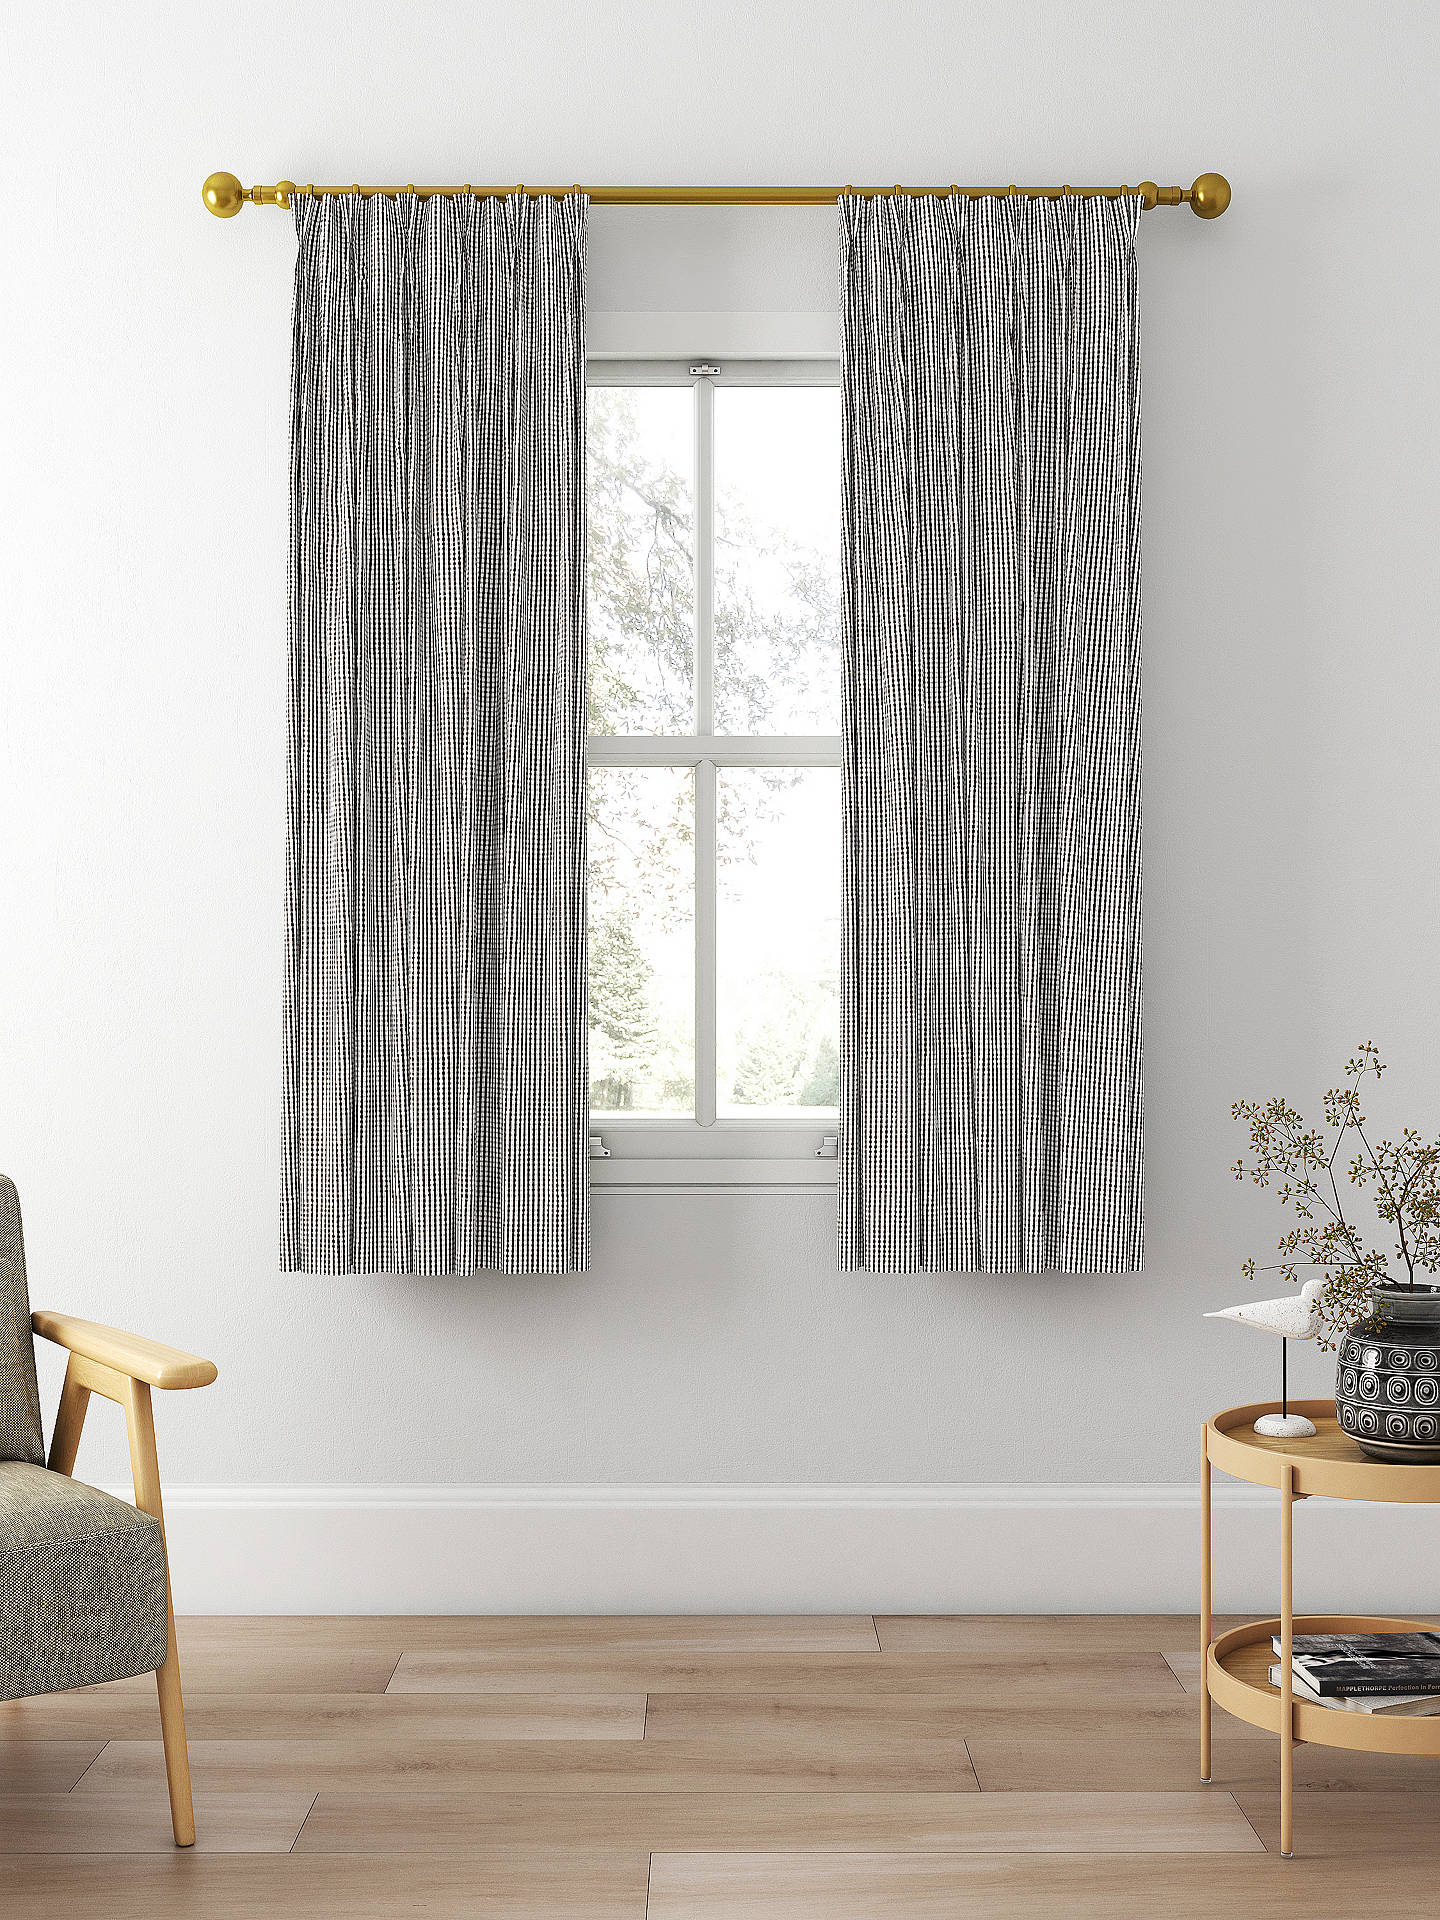 Clarke & Clarke Windsor Made to Measure Curtains, Charcoal